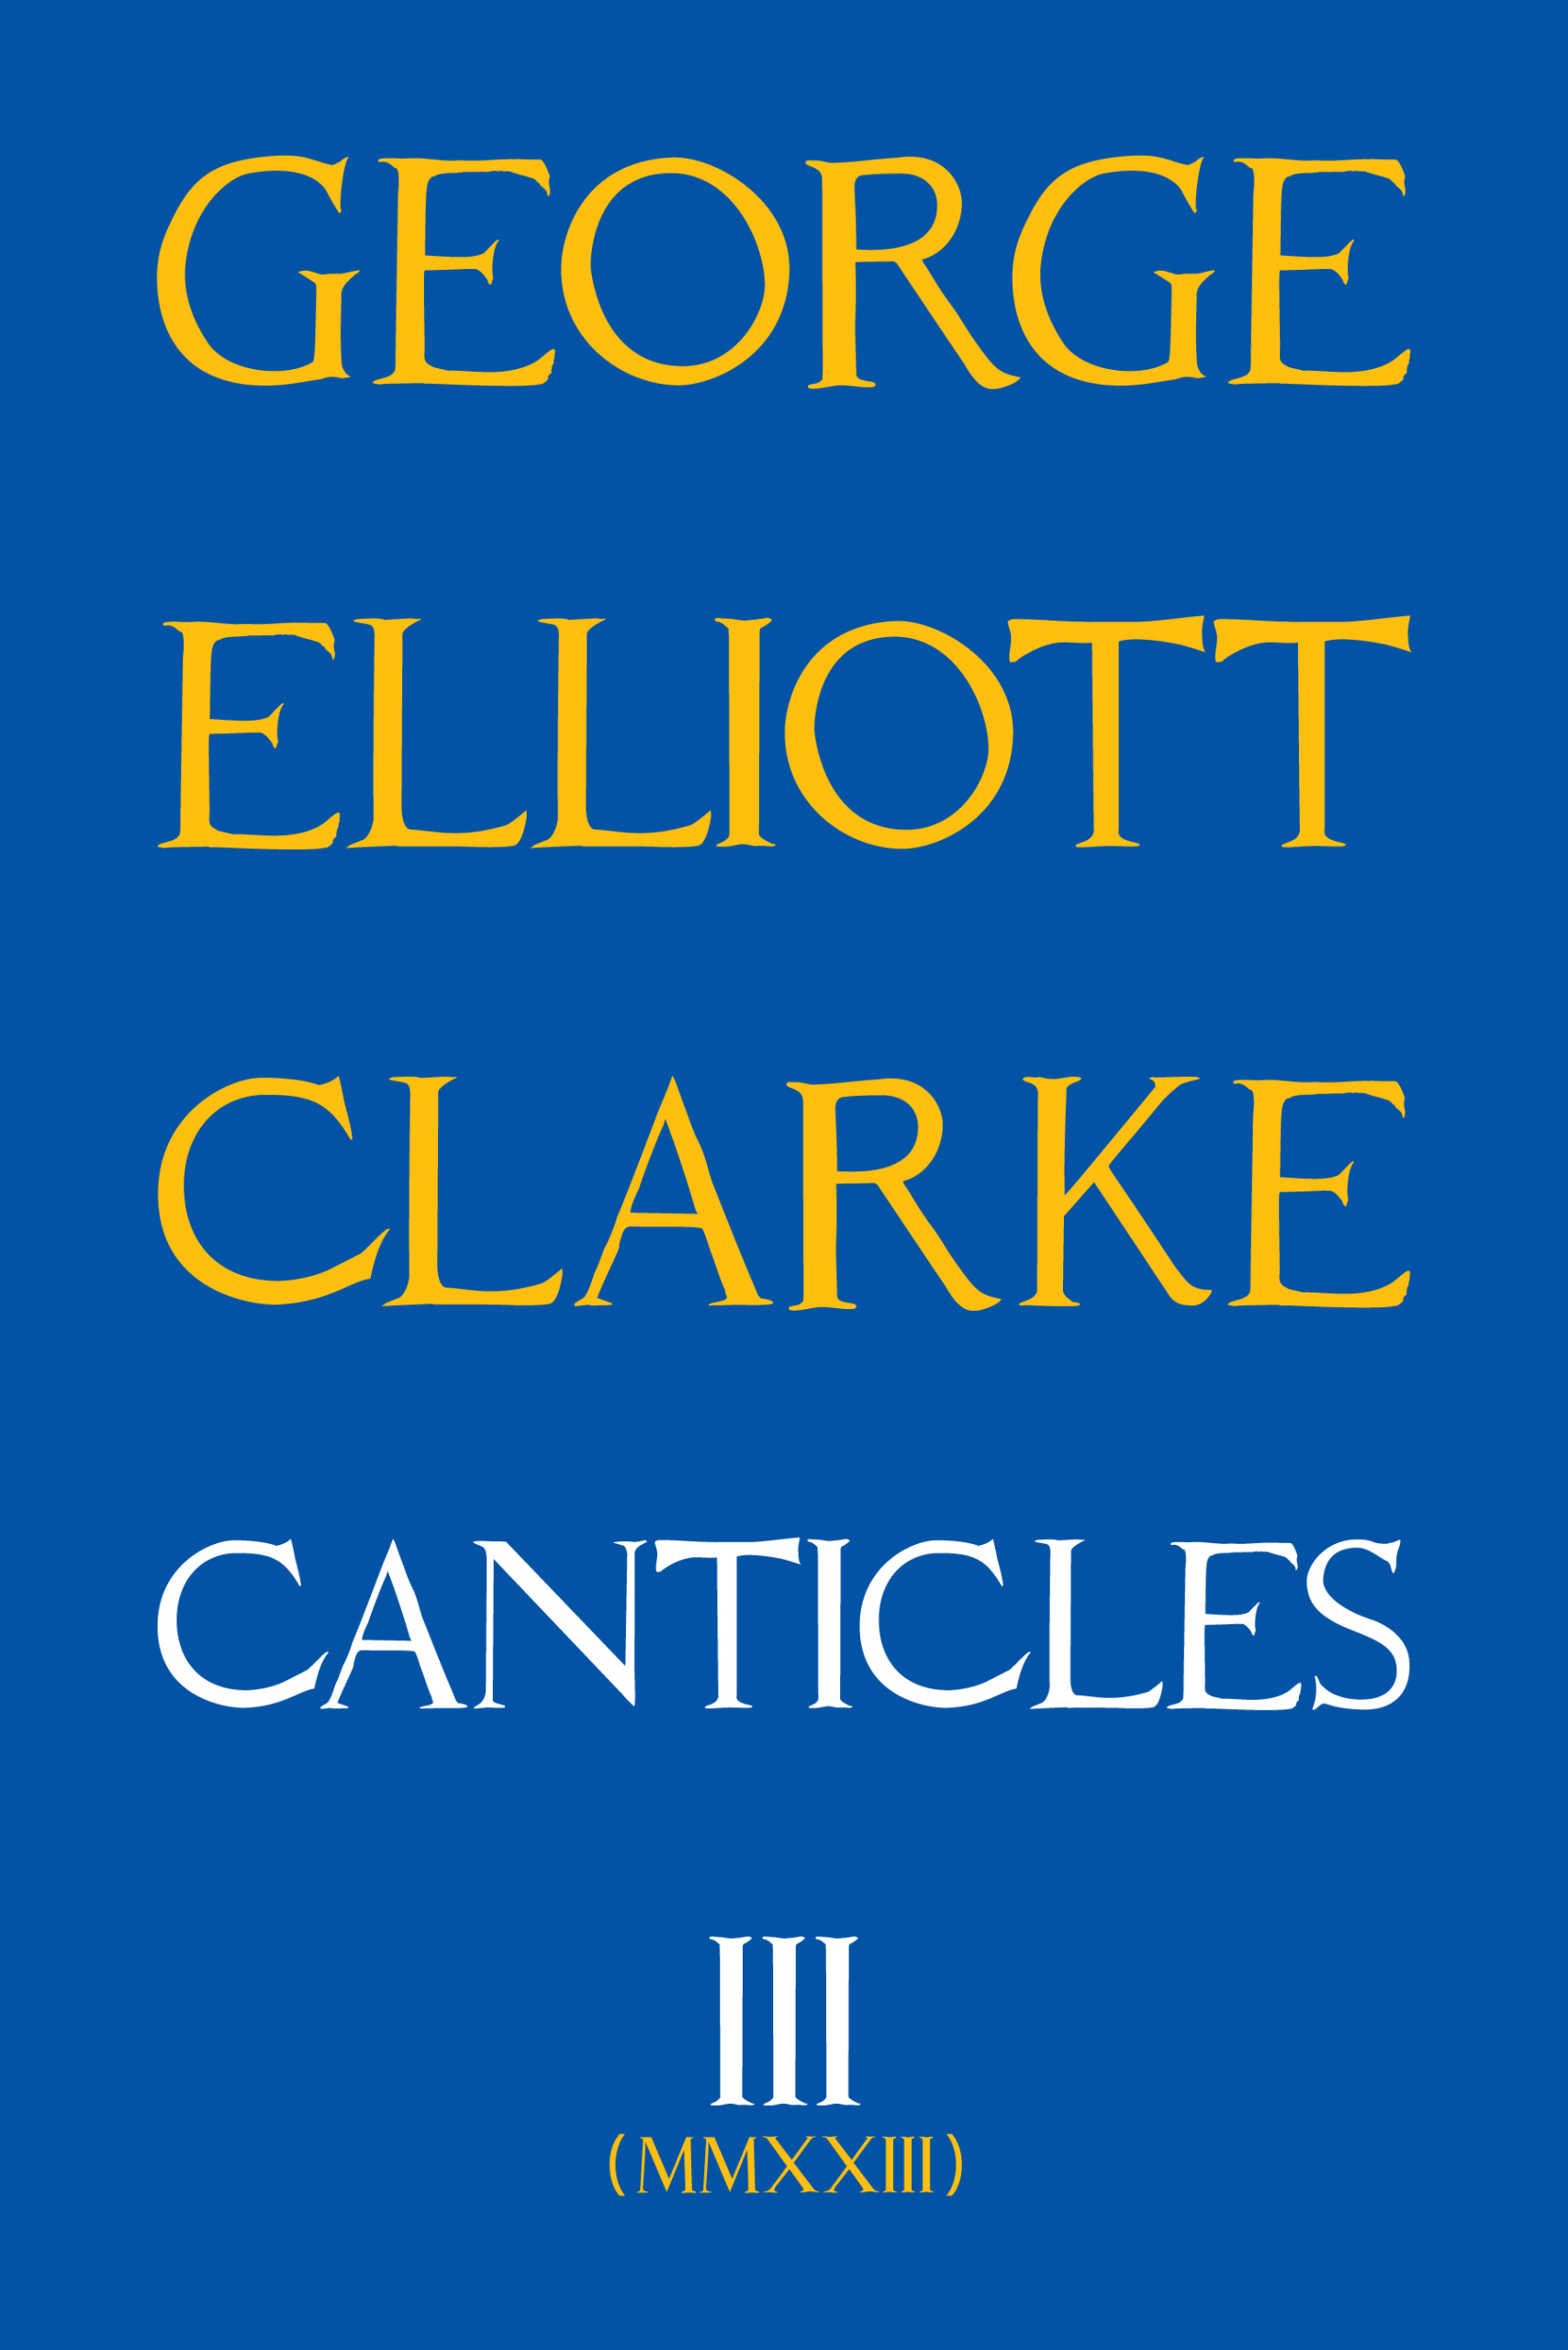 The cover of Canticles III (MMXXIII) by George Elliot Clarke 